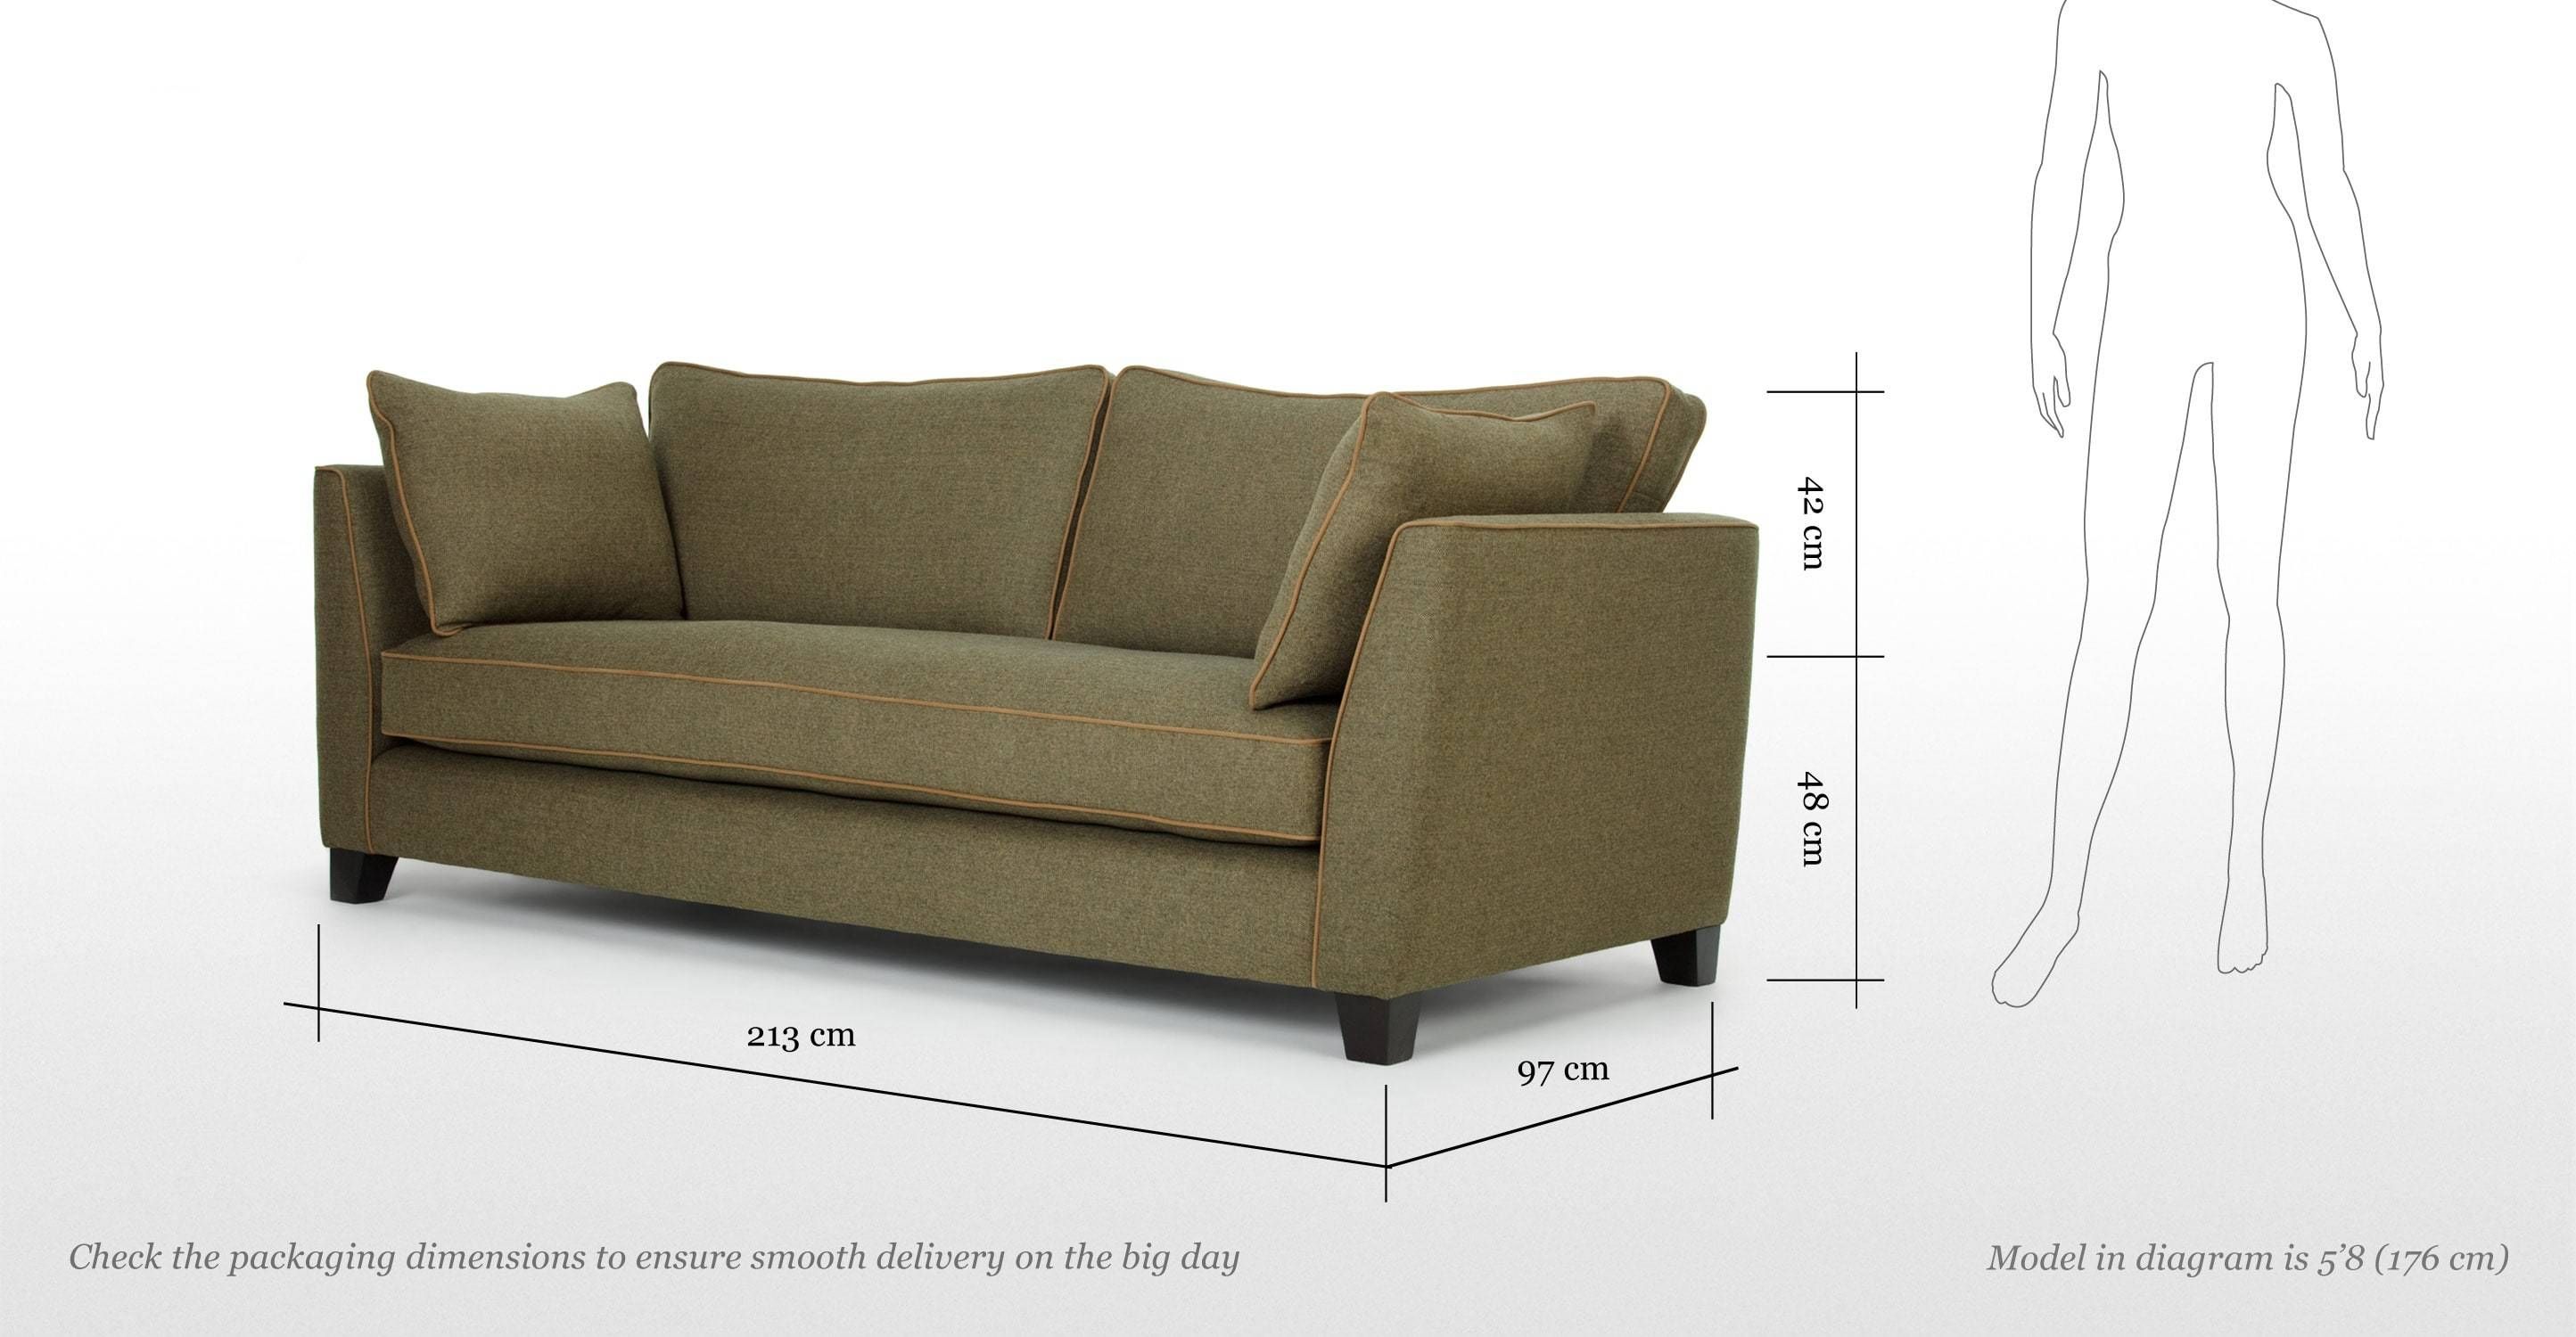 Wolseley 3 Seater Sofa In Wool Tweed | Made Within Tweed Fabric Sofas (View 25 of 30)